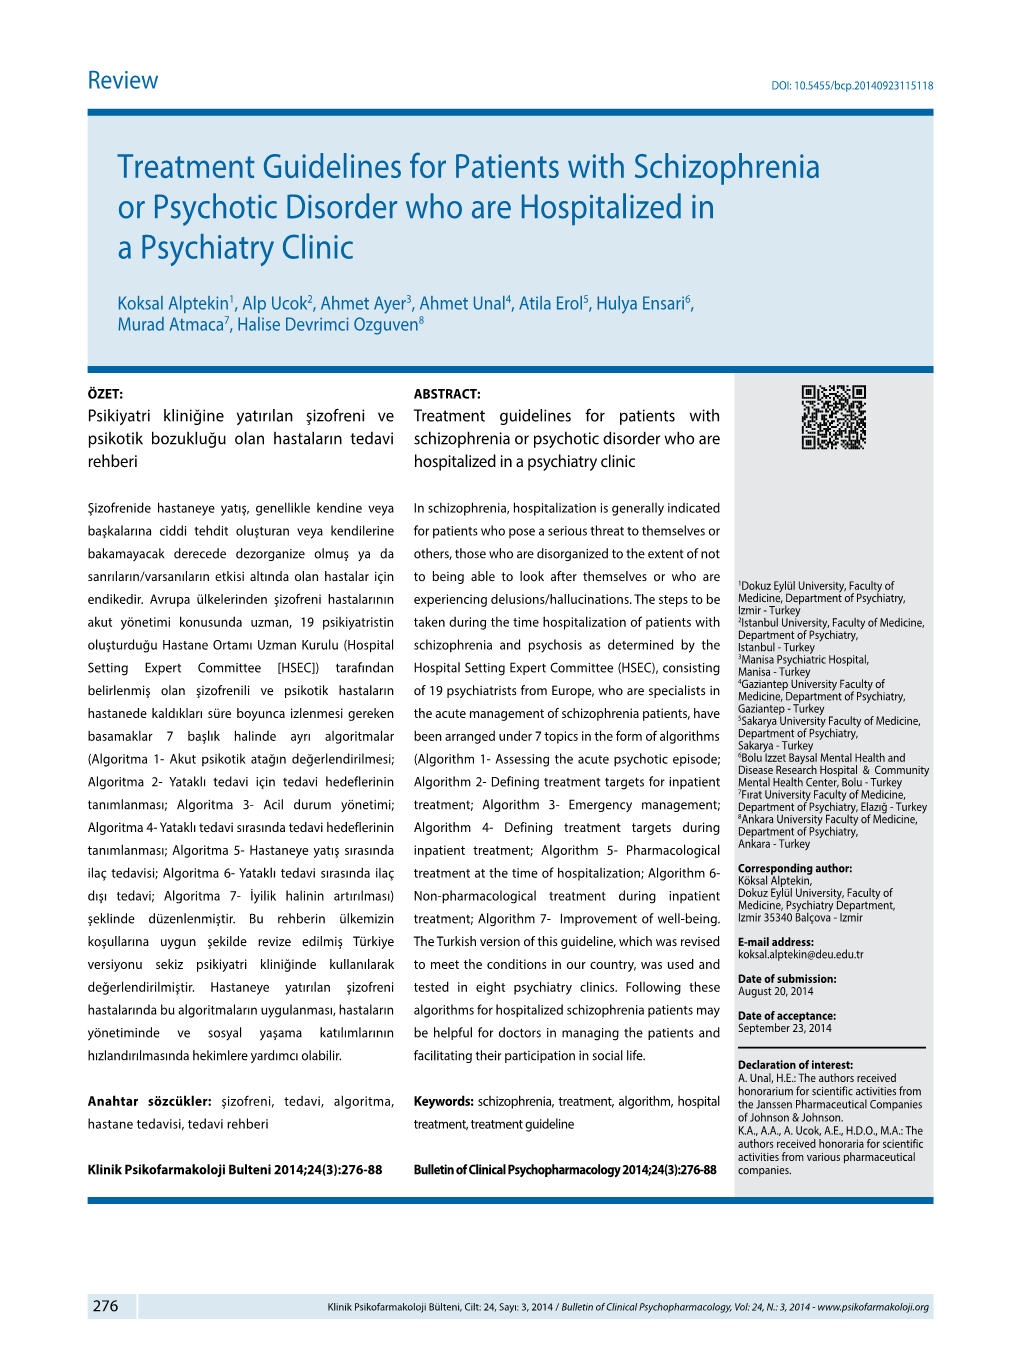 Treatment Guidelines for Patients with Schizophrenia Or Psychotic Disorder Who Are Hospitalized in a Psychiatry Clinic